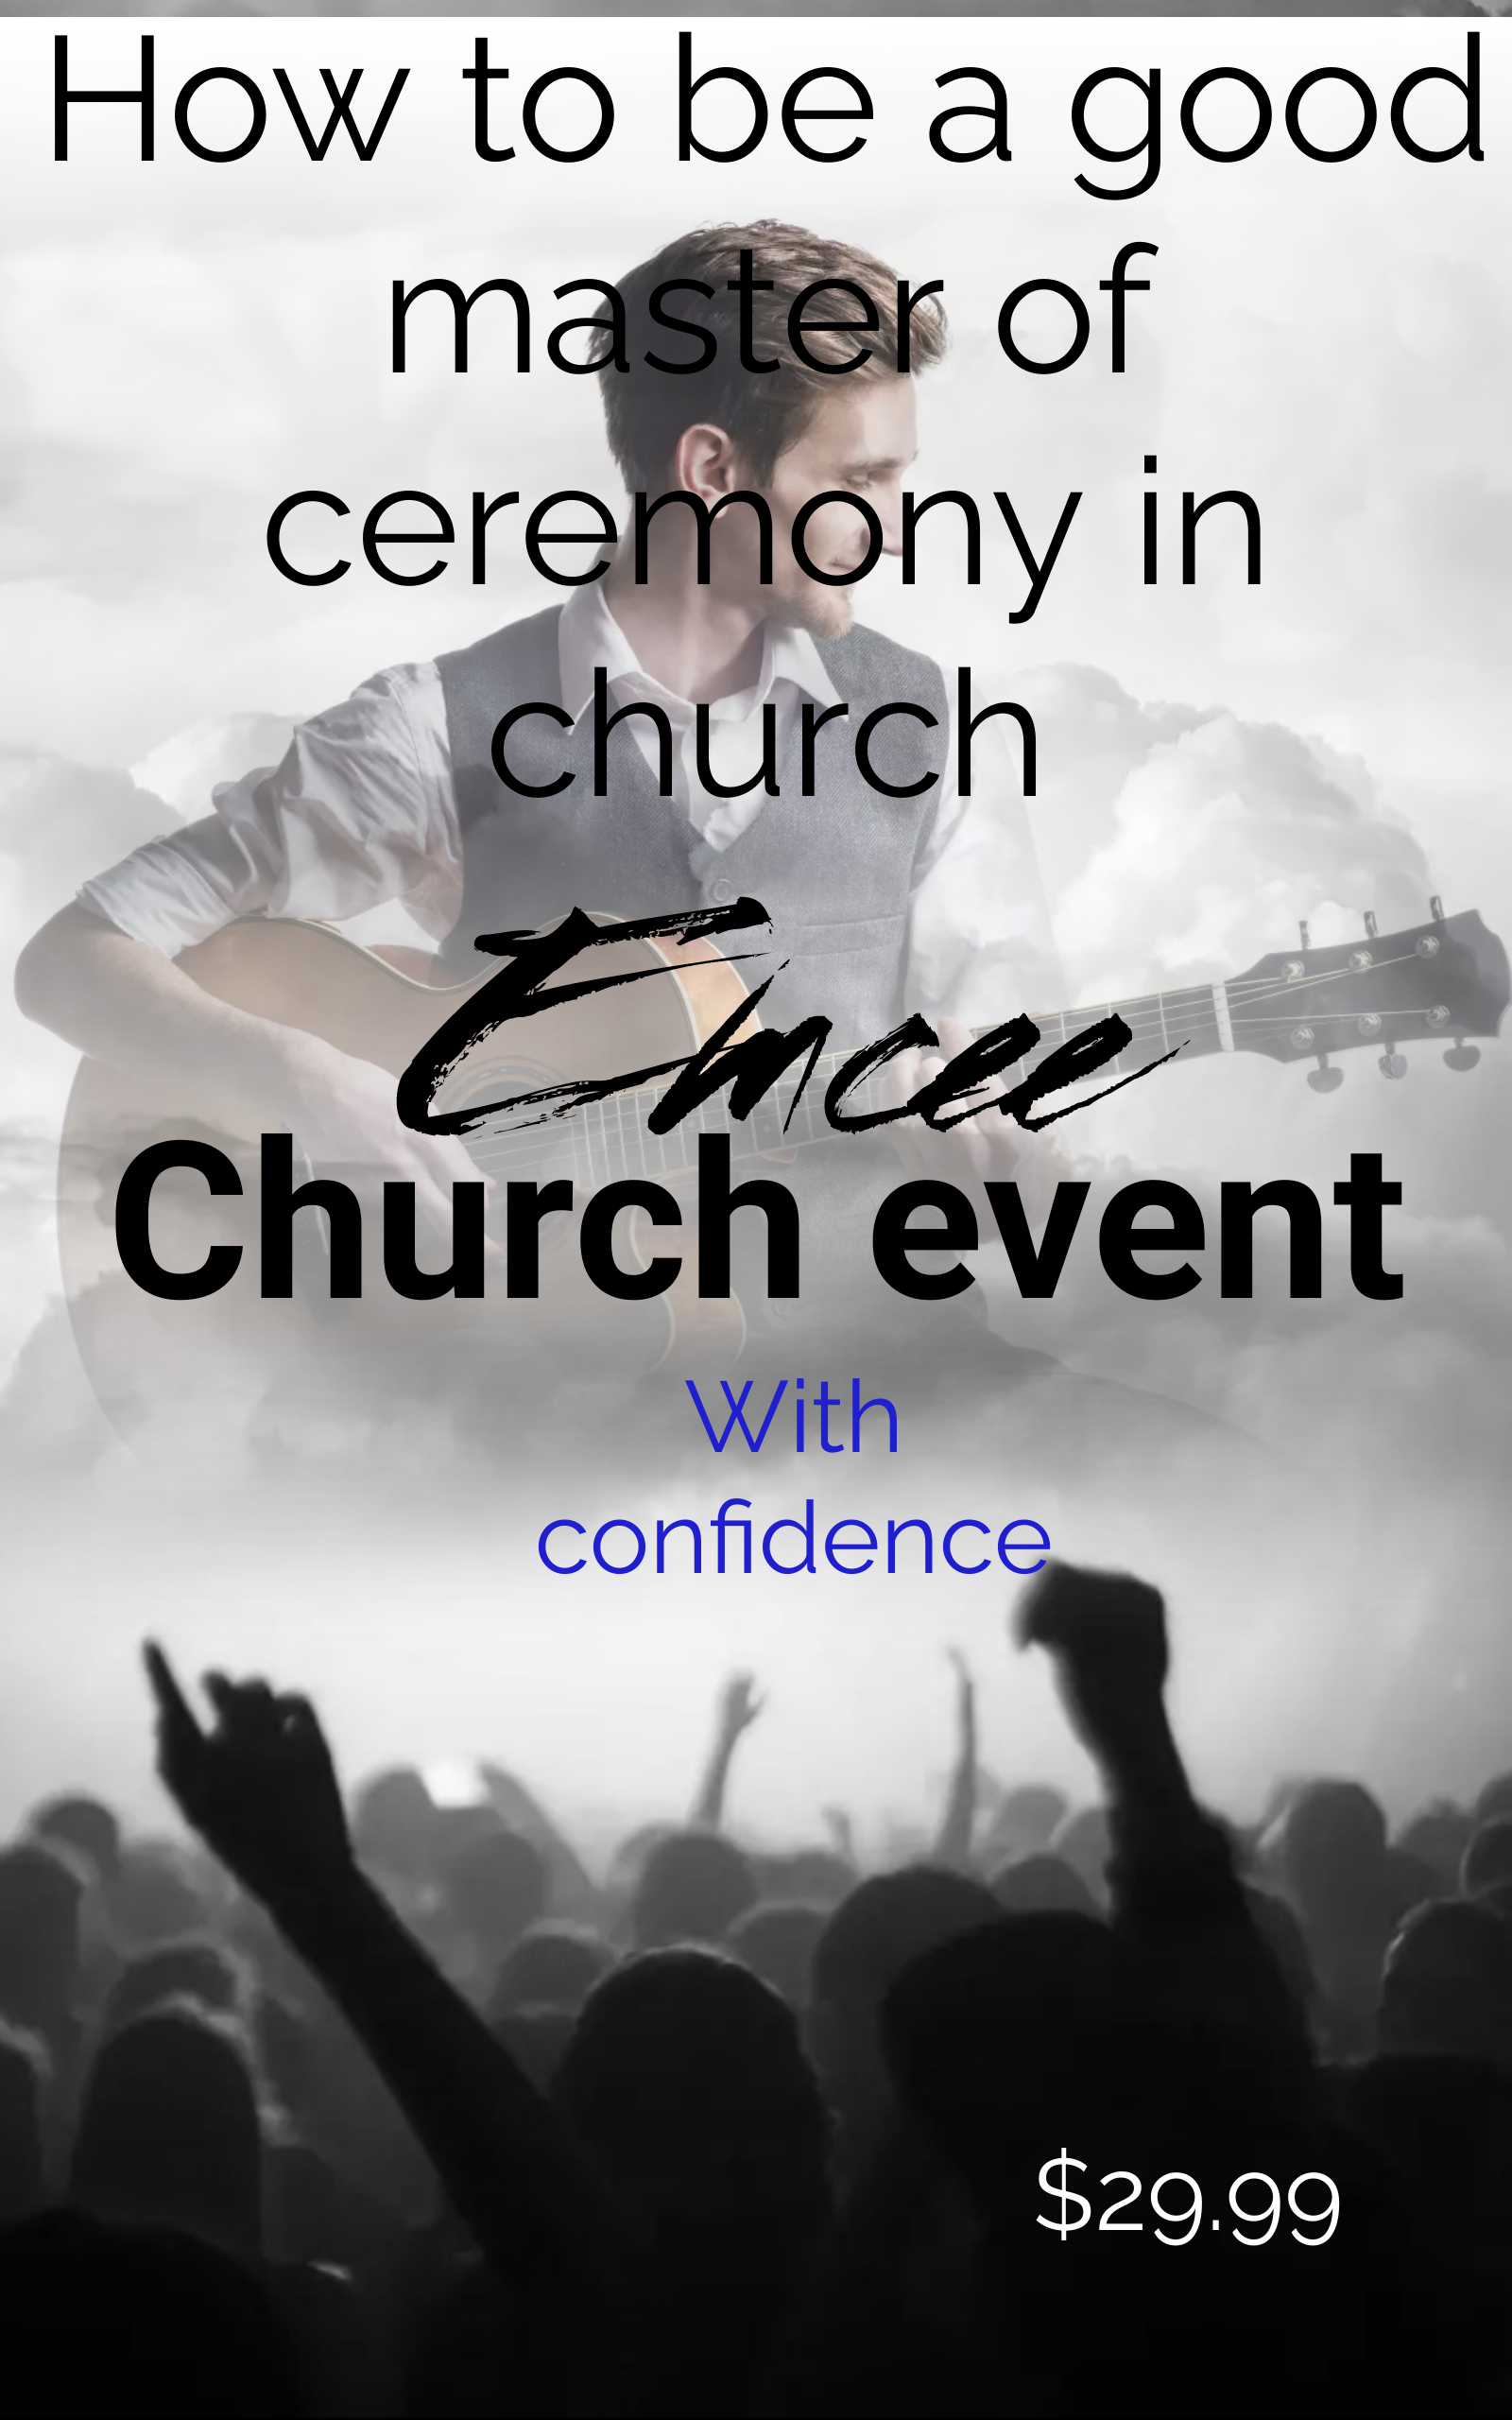 How to be a good master of ceremony in church event